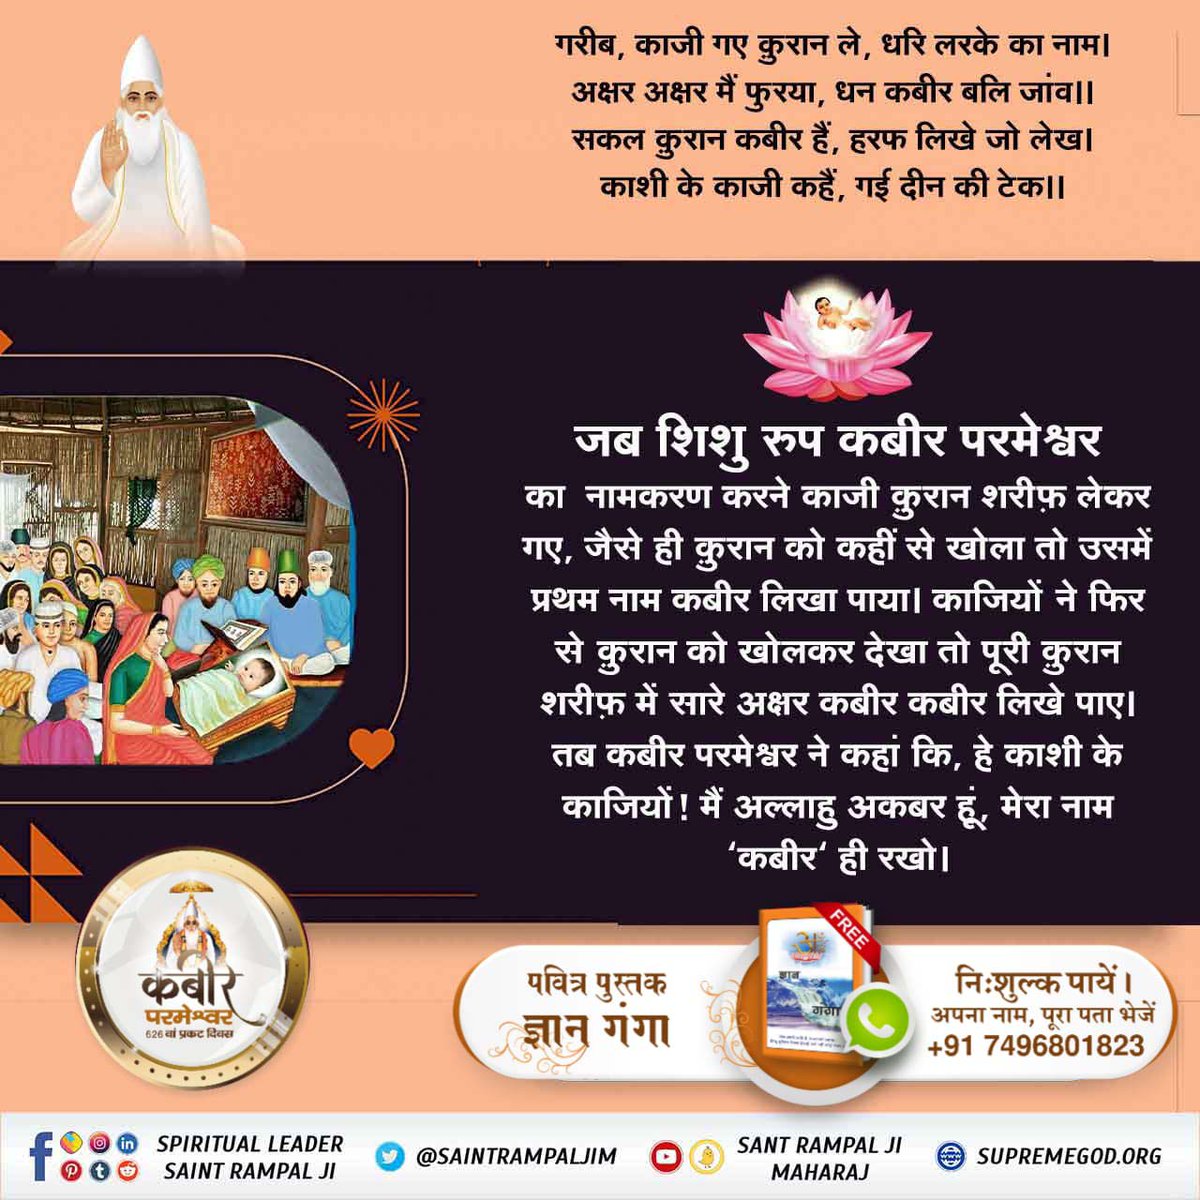 #AppearanceOfGodKabirInKalyug
When the Qazi took QuranSharif to nameGodKabir as a child,as soon as he opened Quran from anywhere he found the first nameKabir written in it.When Qazi's opened theQuran again,they found al th letters Kabir Kabir written in the entire Quran Sharif.